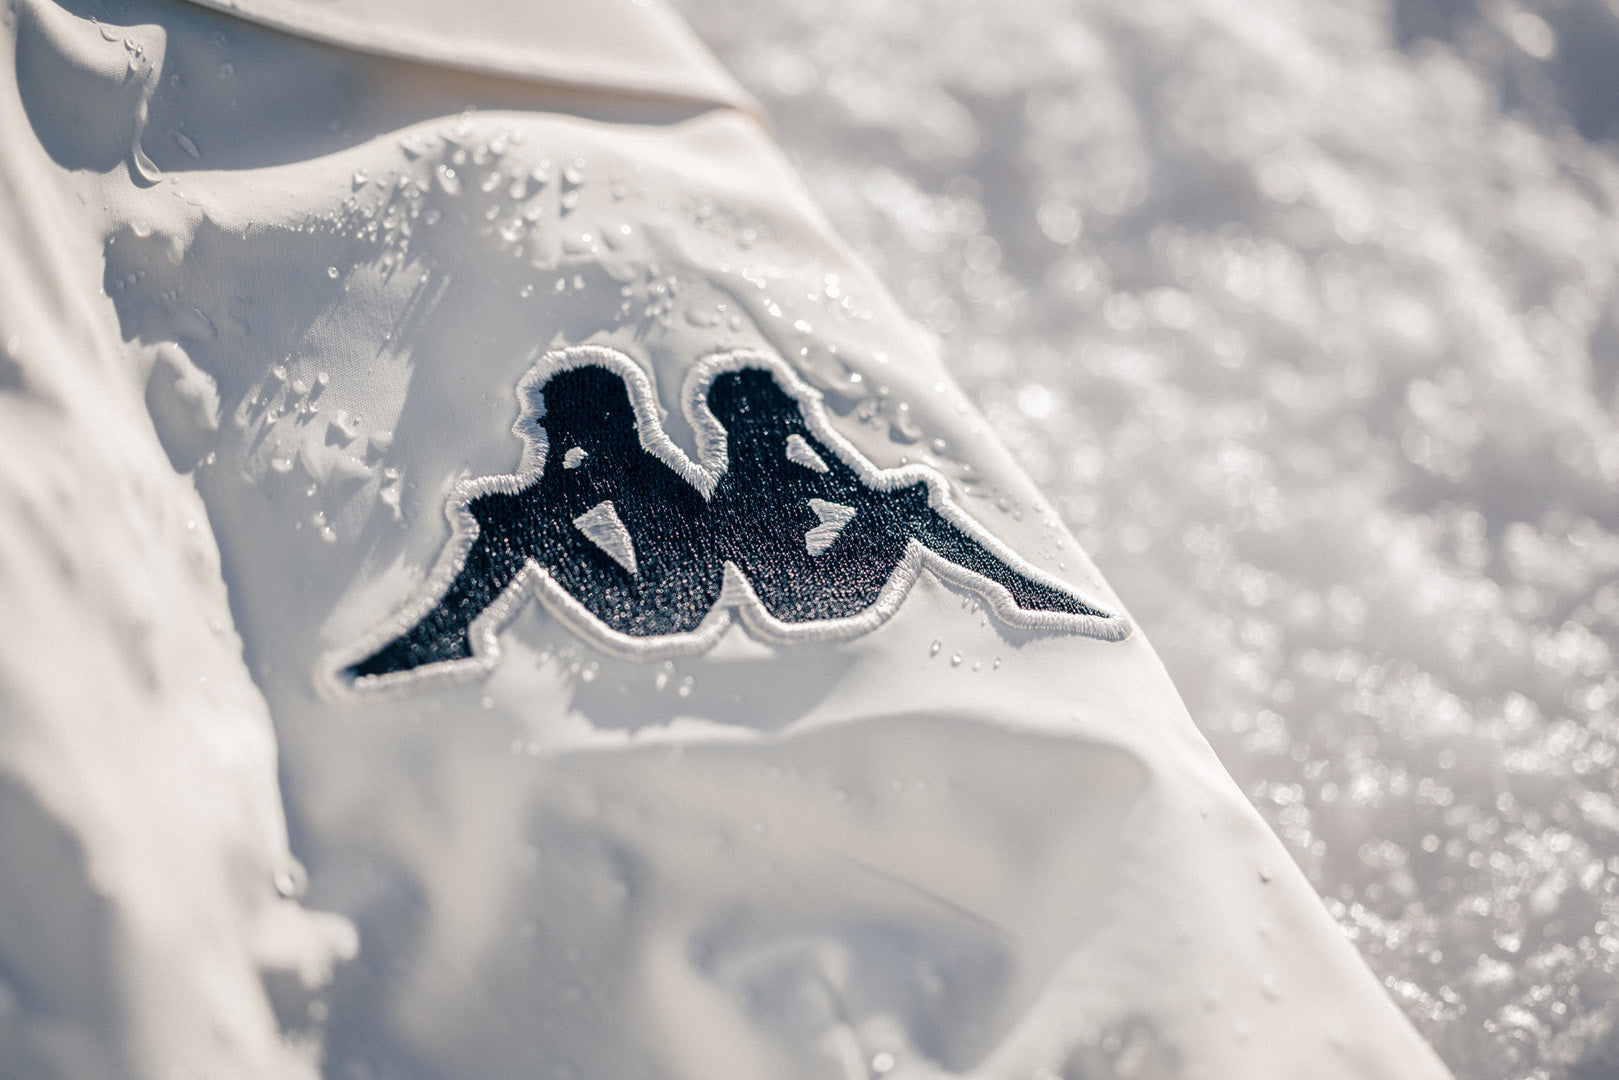 Extreme close up of white Kappa ski jacket with dew and powdery ice surface. Embroidered Logo in focus.